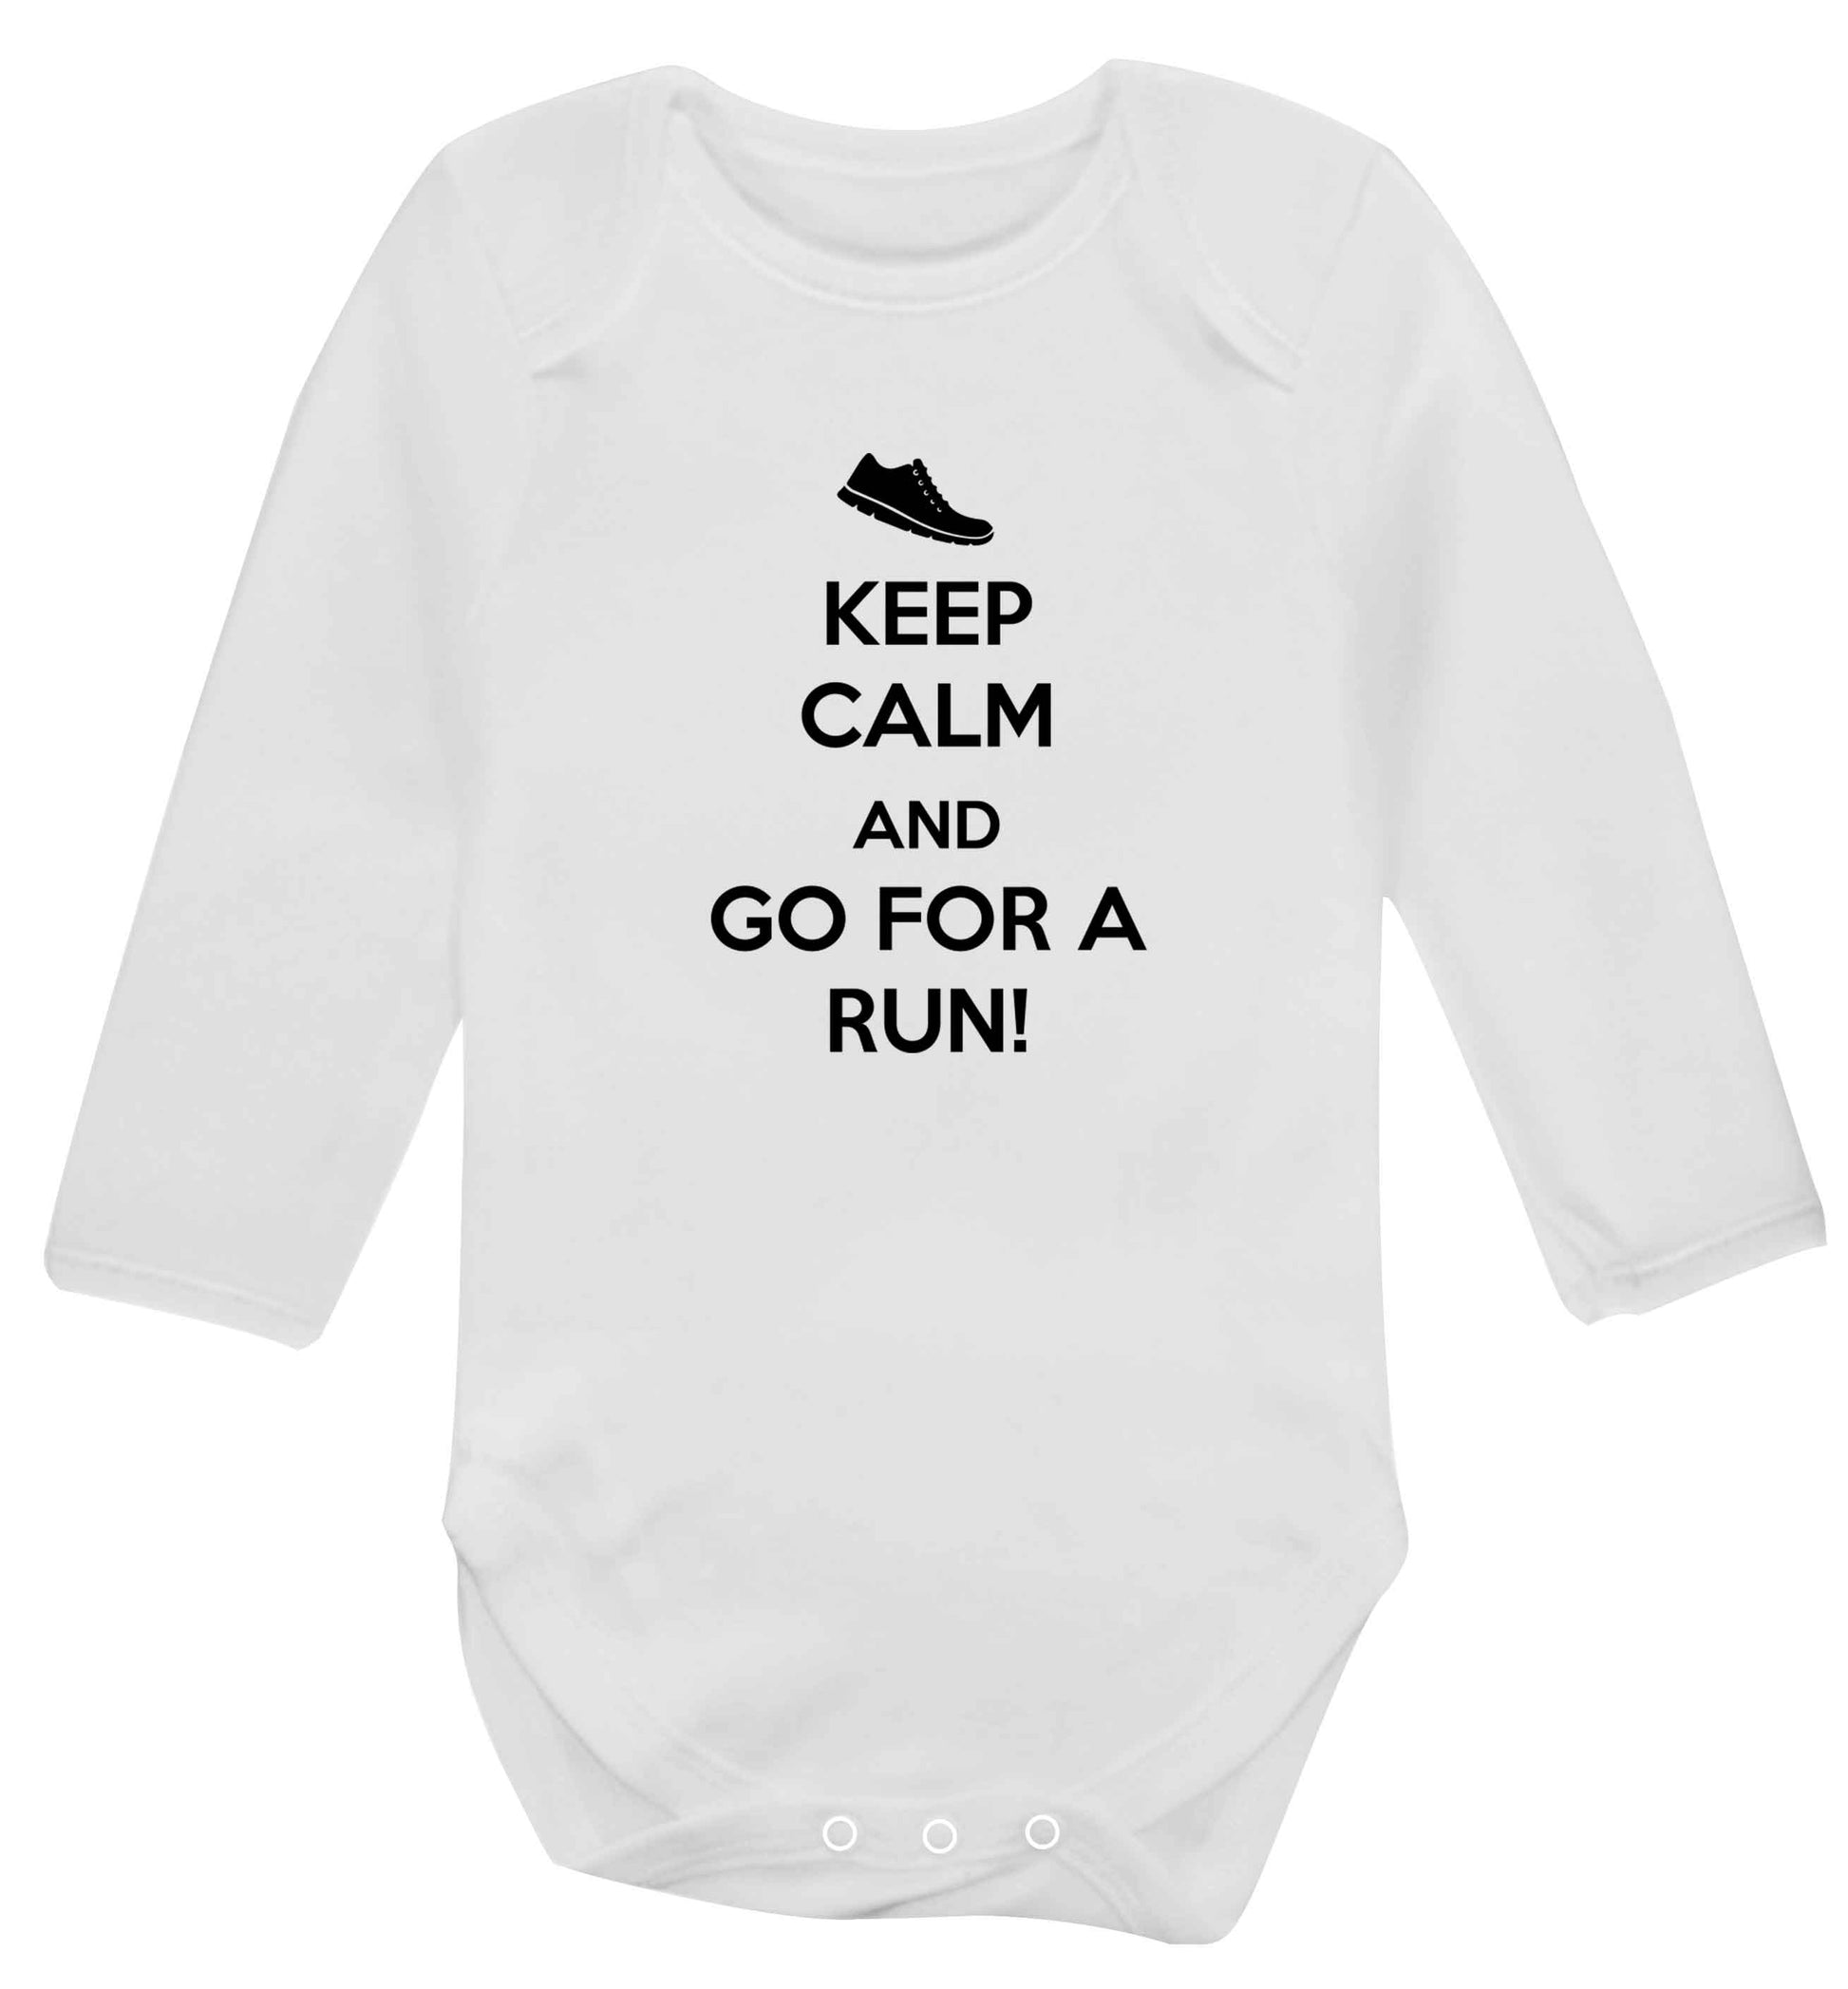 Keep calm and go for a run baby vest long sleeved white 6-12 months